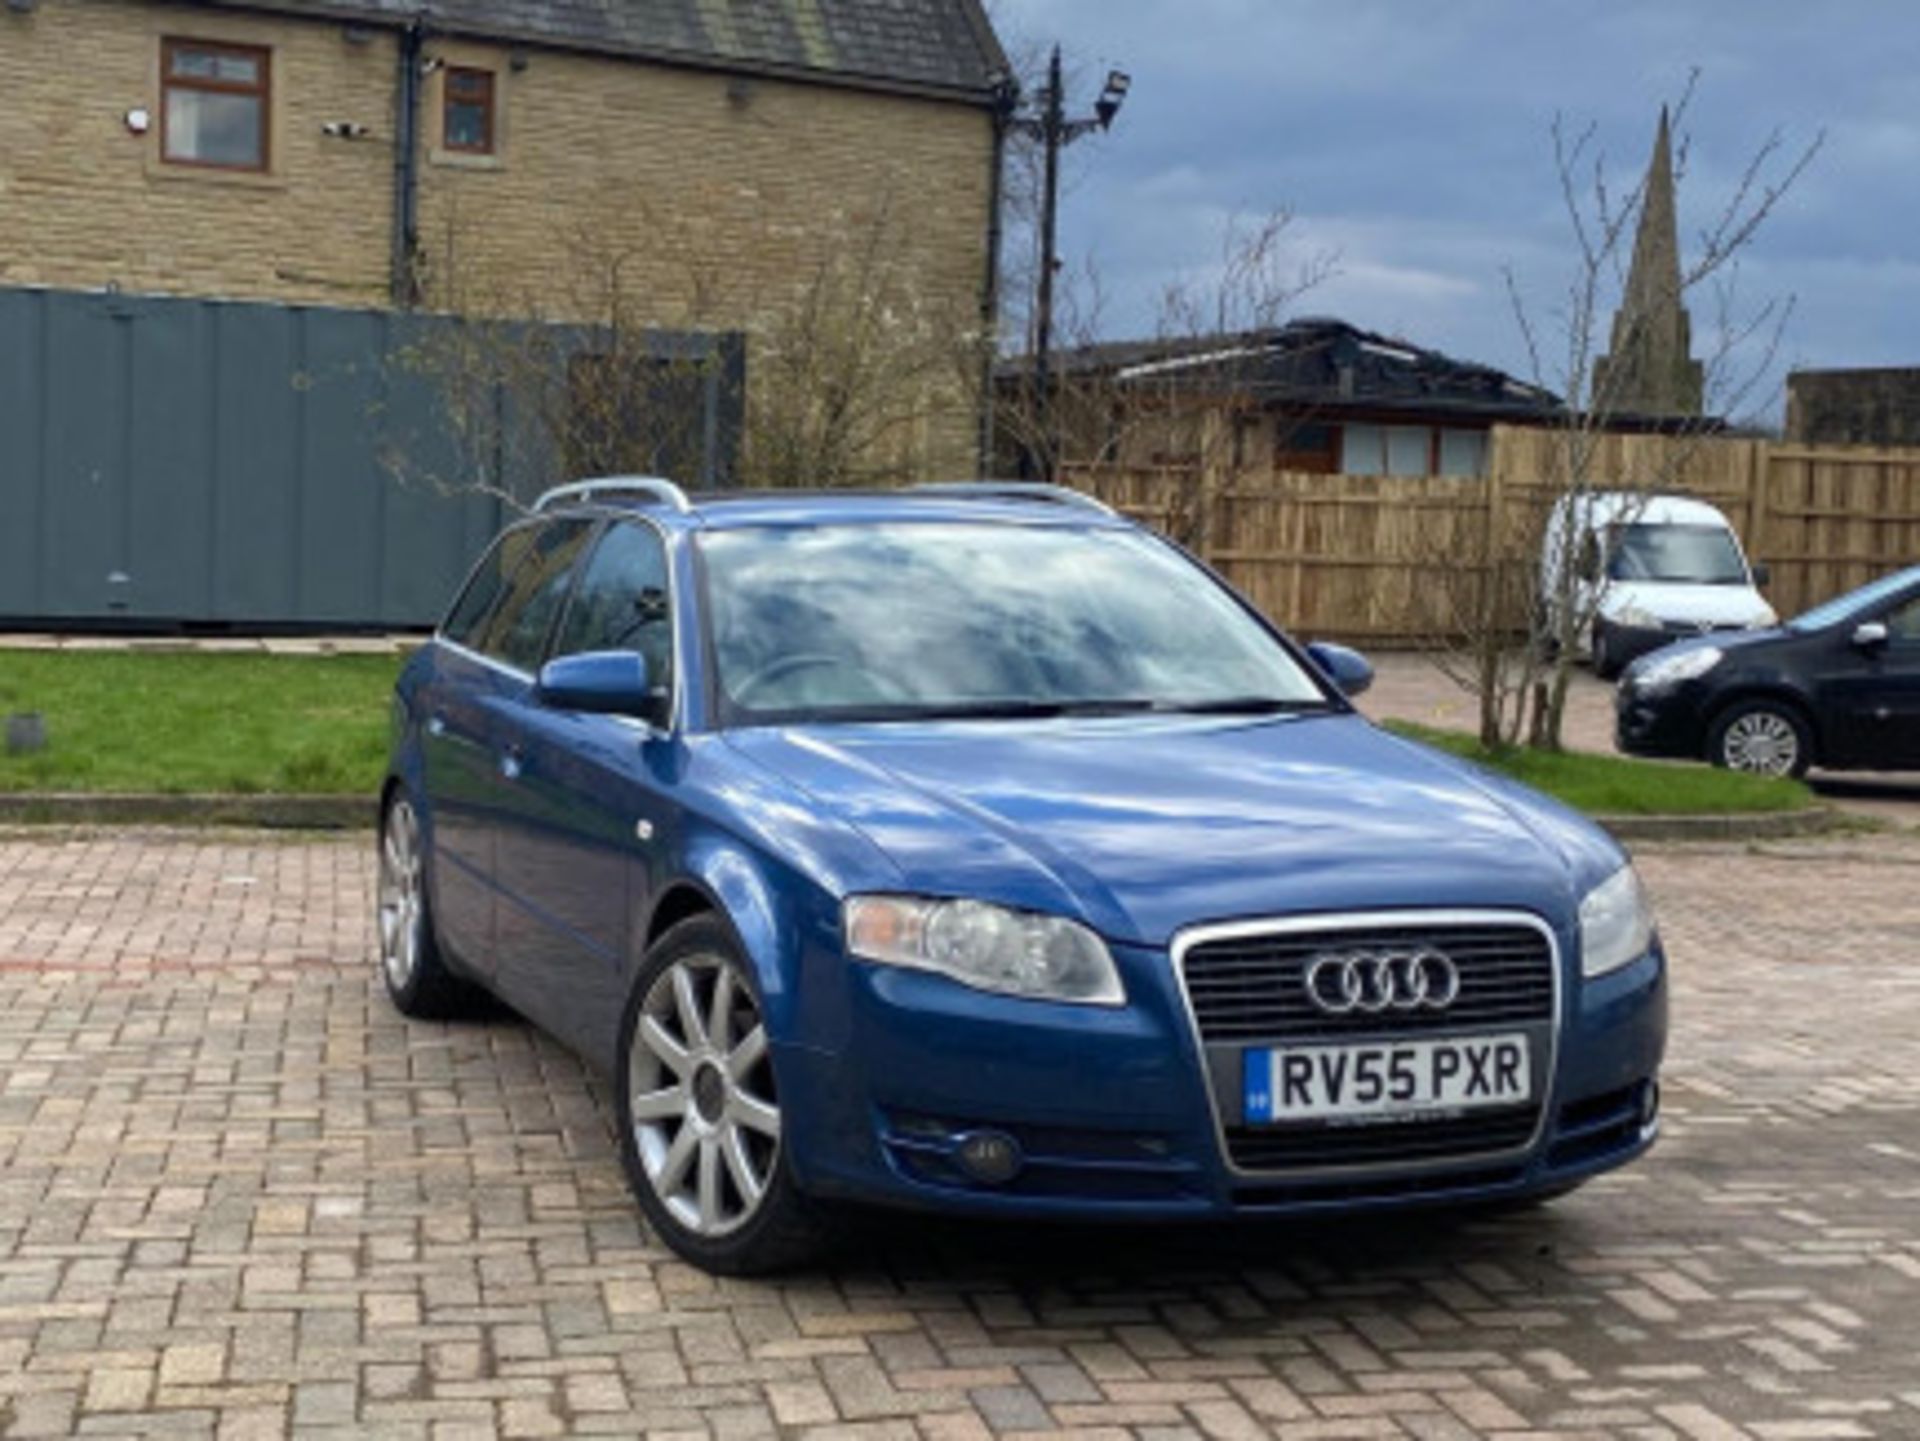 AUDI A4 AVANT 1.9 TDI SE 5DR ESTATE - RARE AND RELIABLE LUXURY WAGON >>--NO VAT ON HAMMER--<< - Image 43 of 97